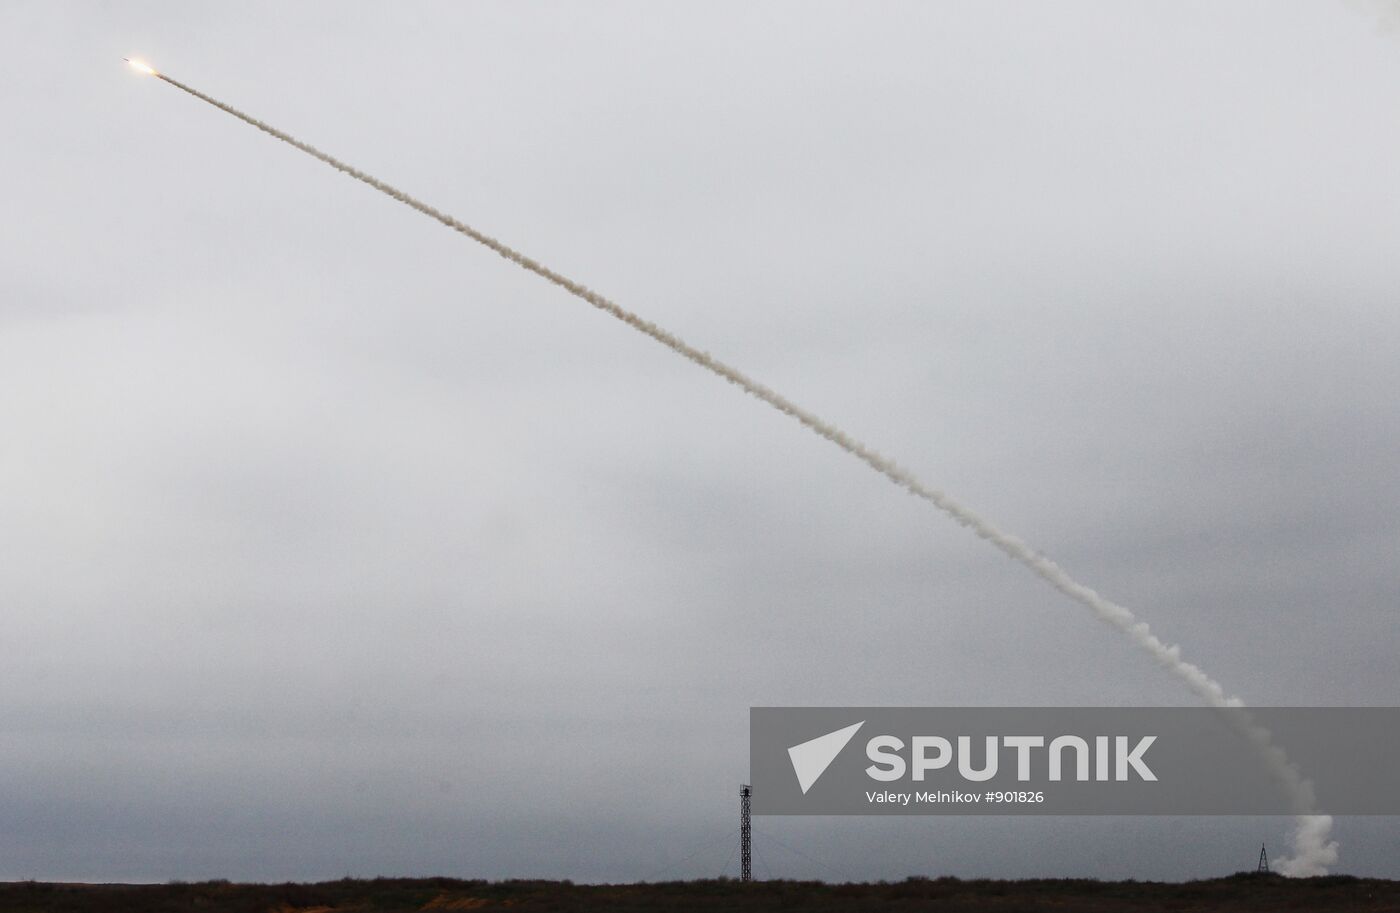 Russia,Belarus and Kazakhstan's air force and air defense drills